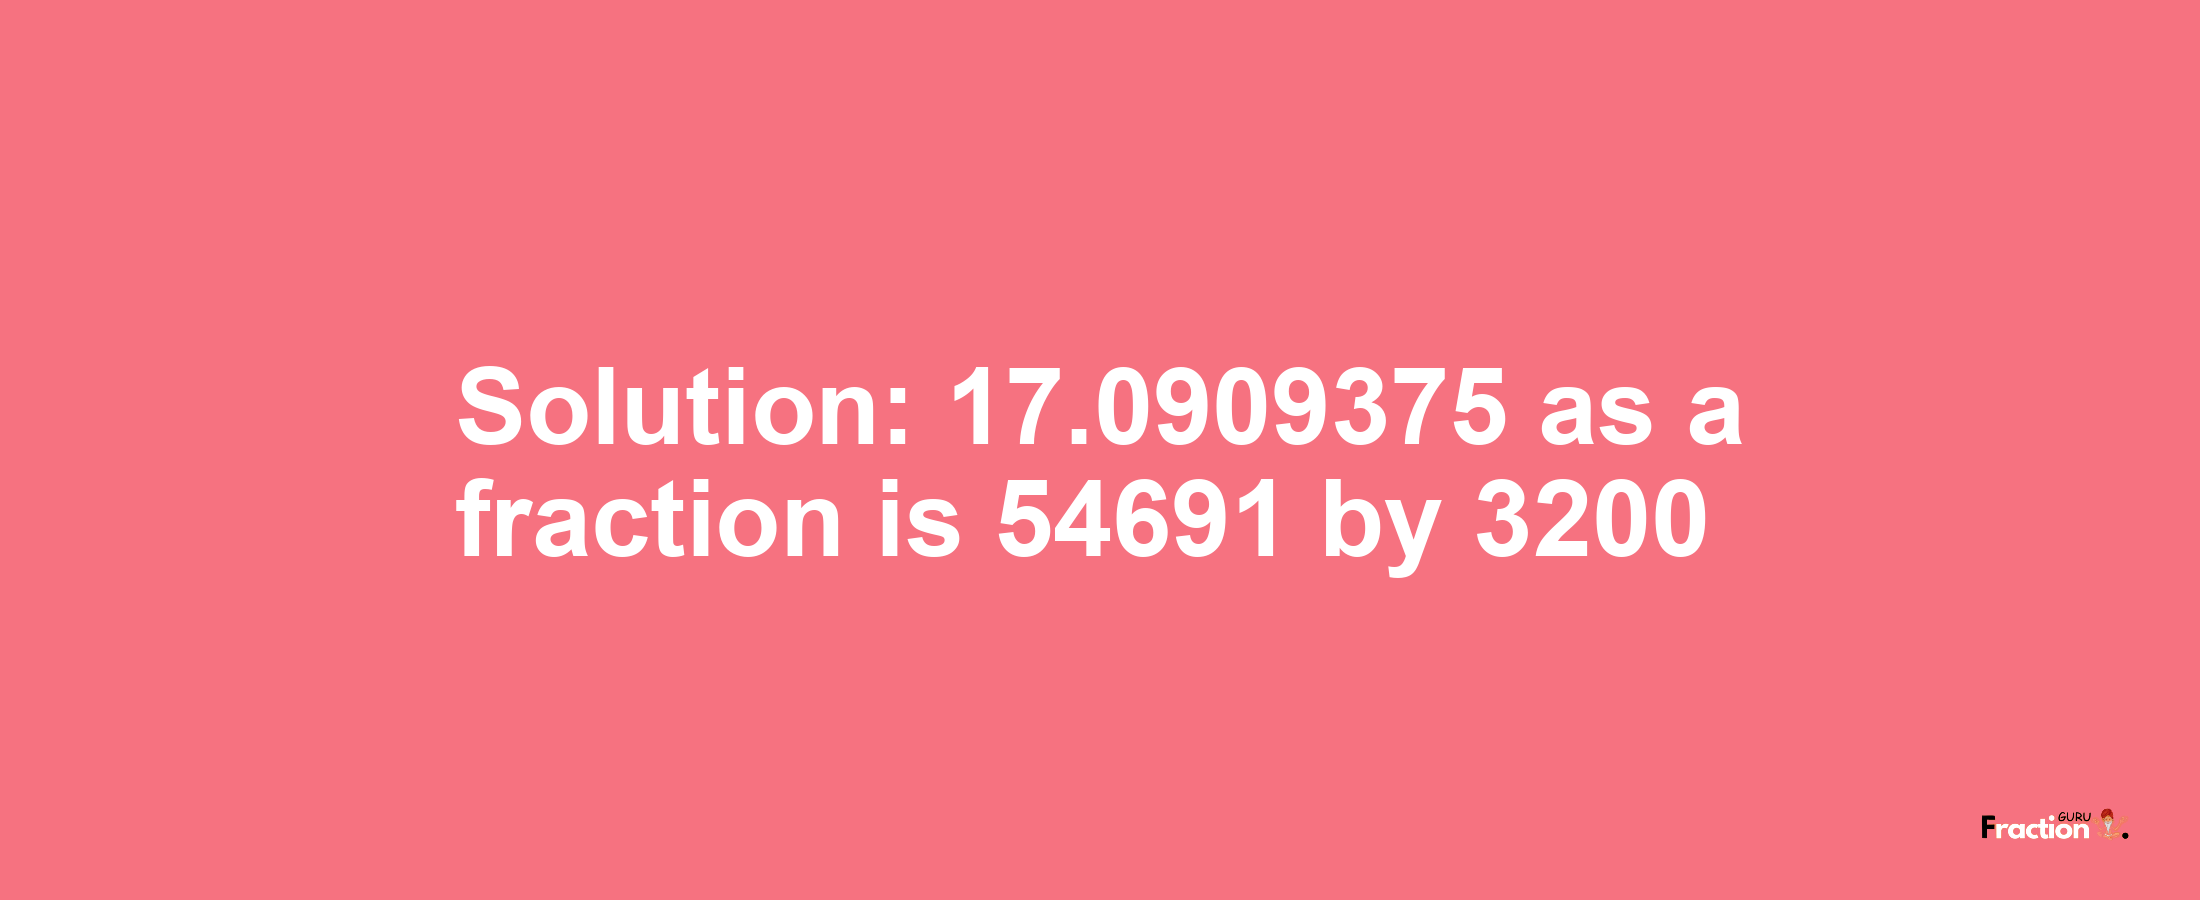 Solution:17.0909375 as a fraction is 54691/3200